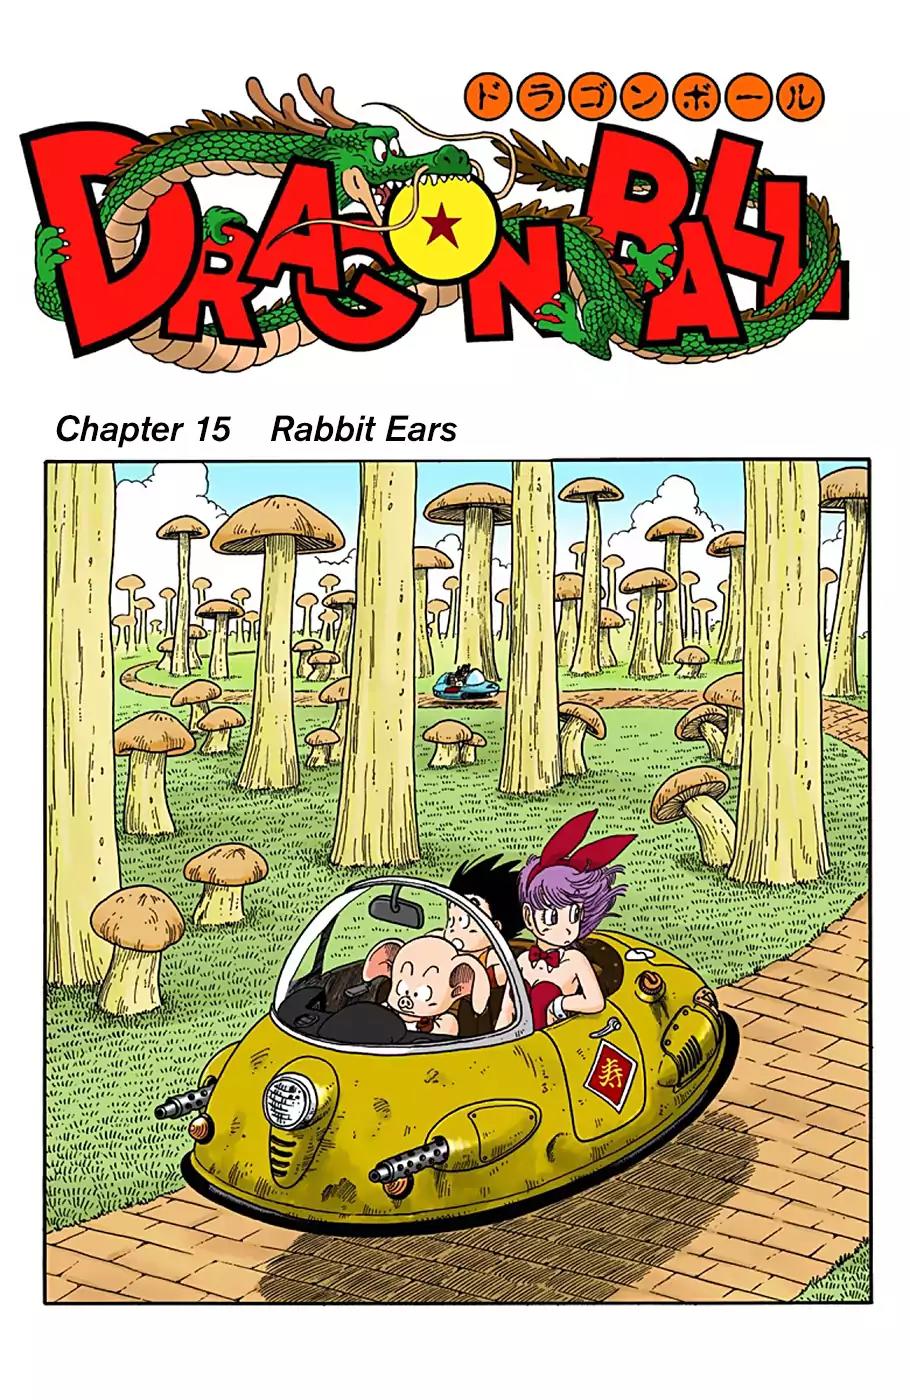 Dragon Ball - Full Color Vol.2 Chapter 16: